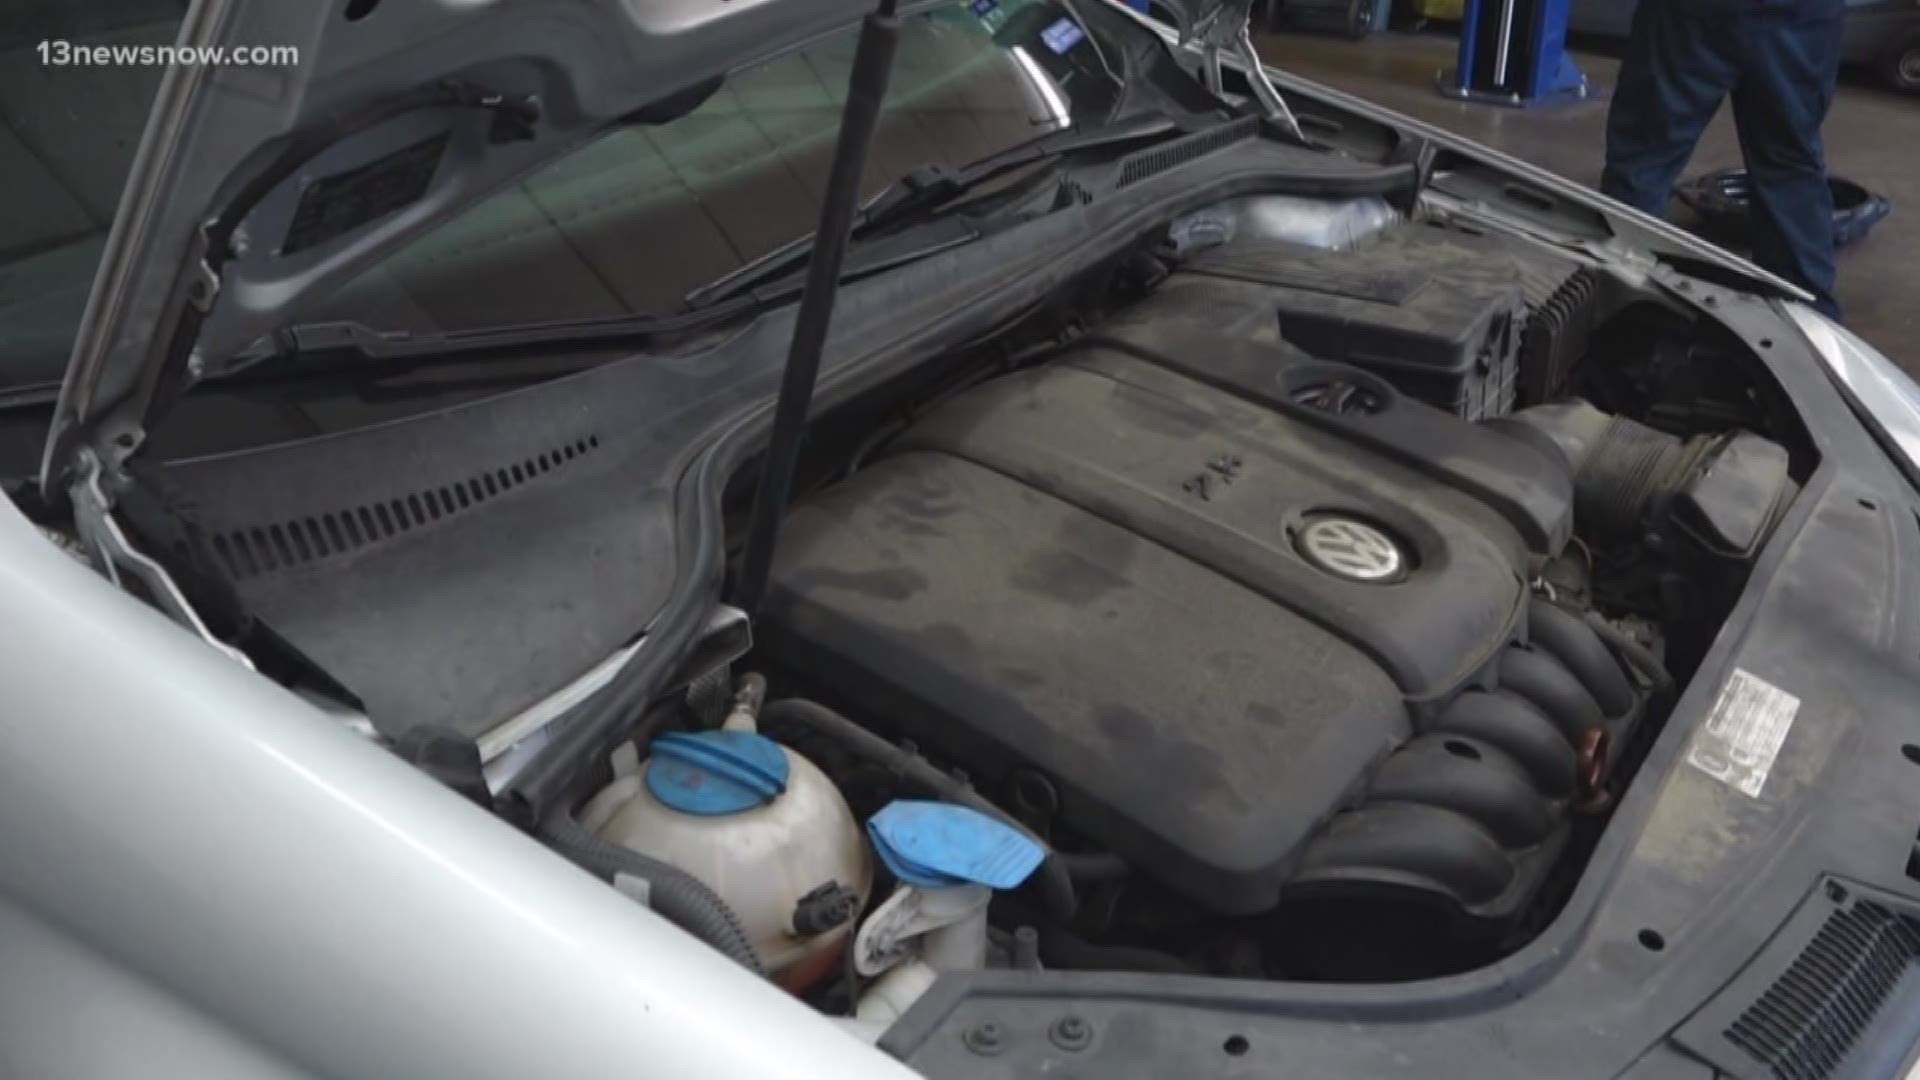 If the air is blowing out warm, it's normally a low freon level or that the engine is overheated. If it's not blowing, it could be a blower issue. Once you think you know the issue, or if you're still confused, take your car to a shop you trust.